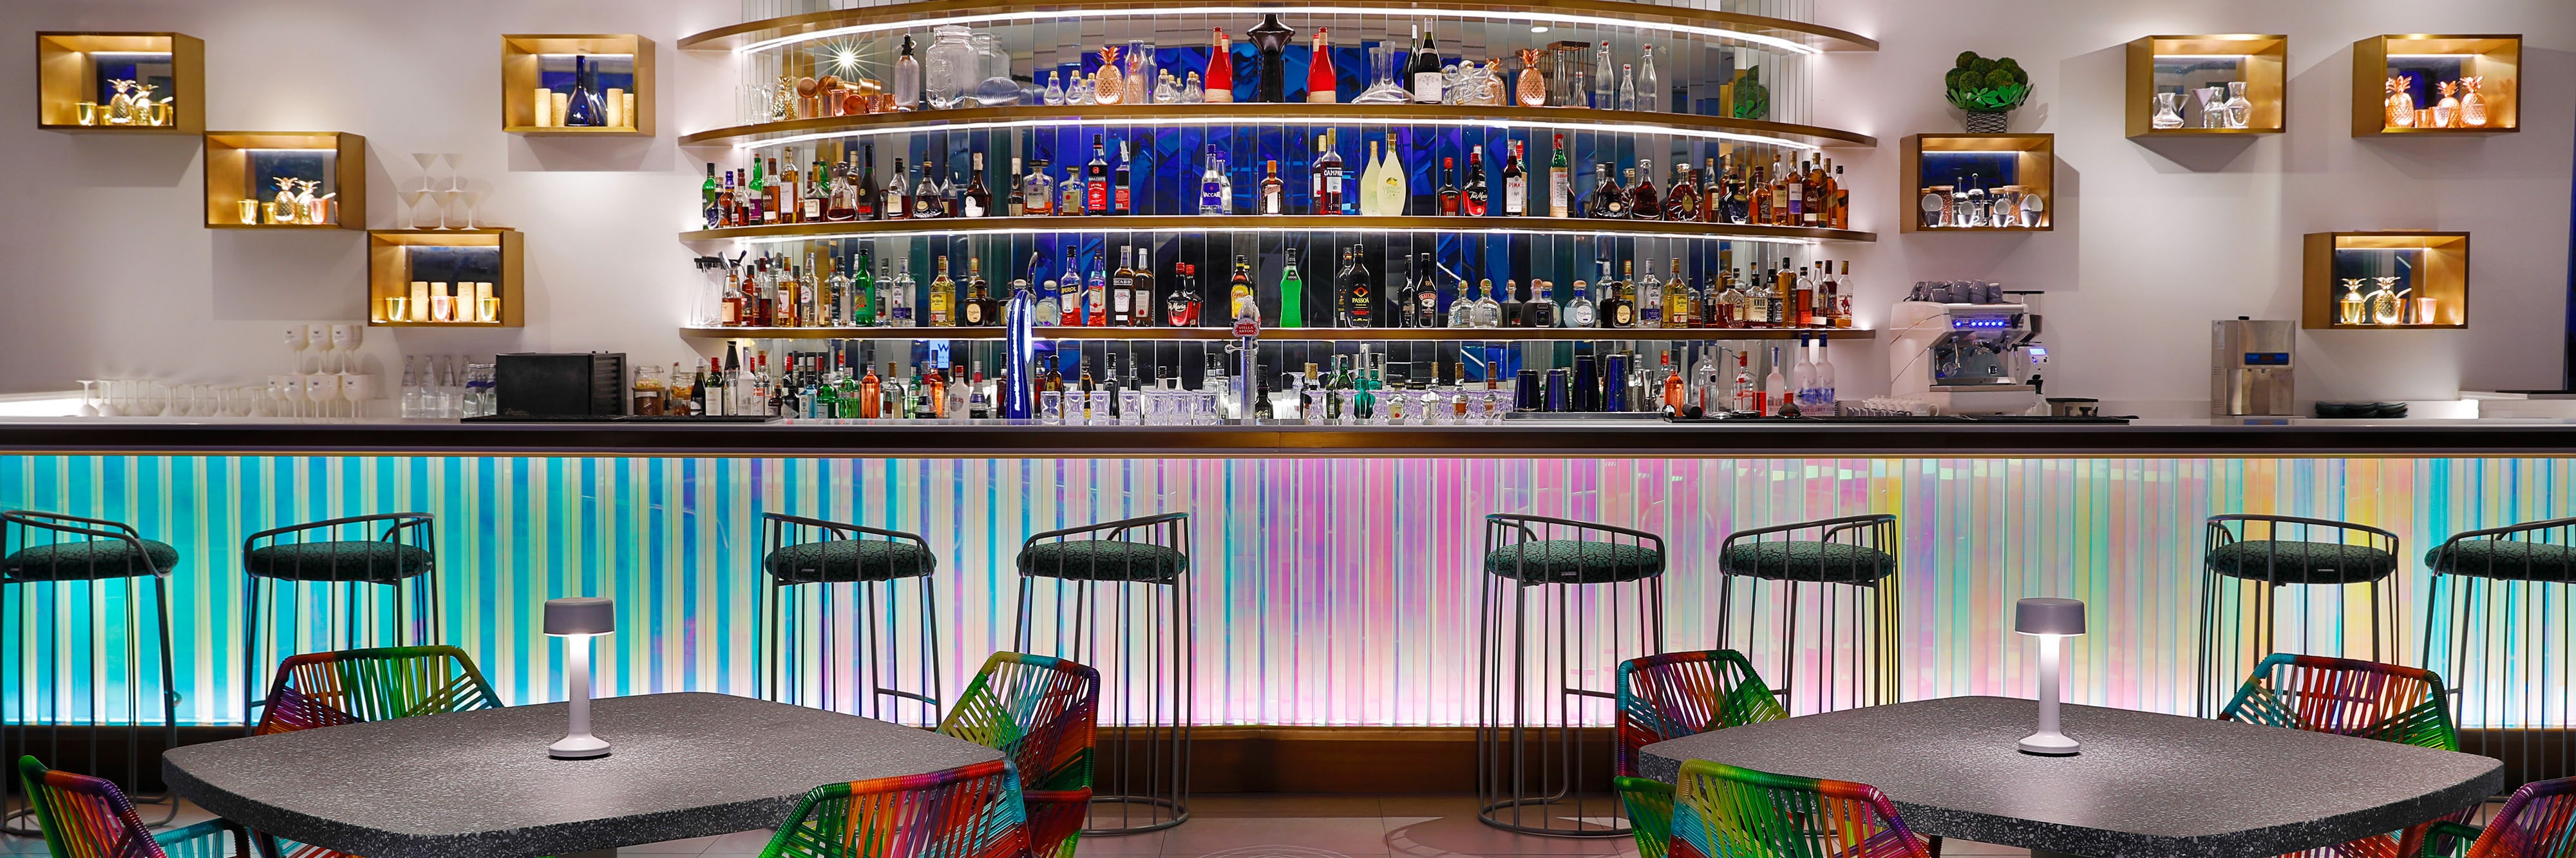 Colorful bar seating area